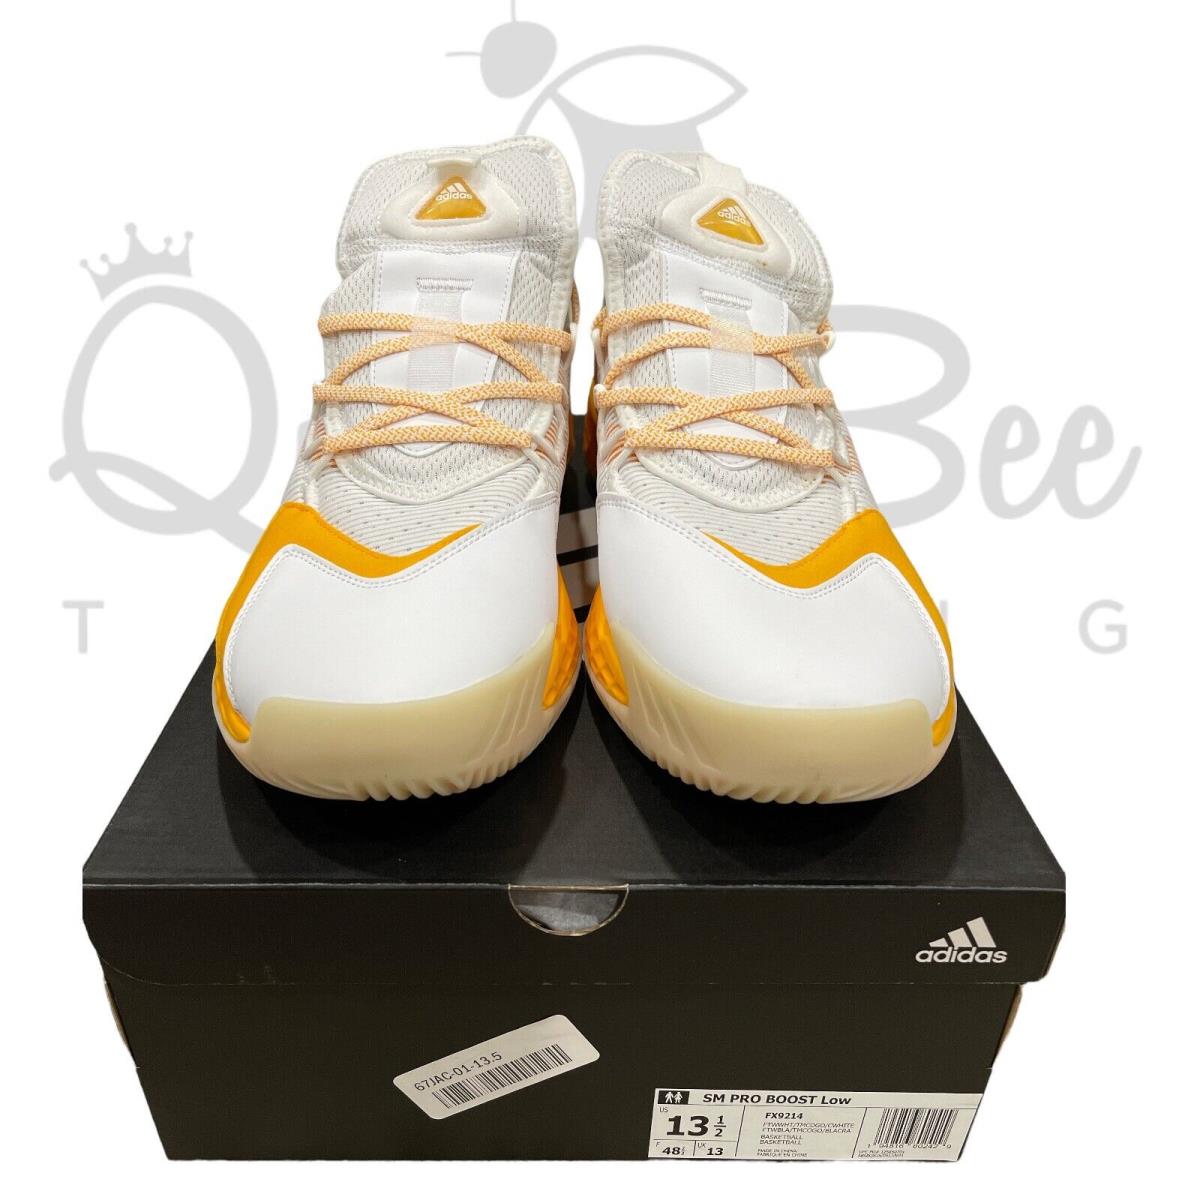 Adidas shoes Pro Boost - Yellow/White 4